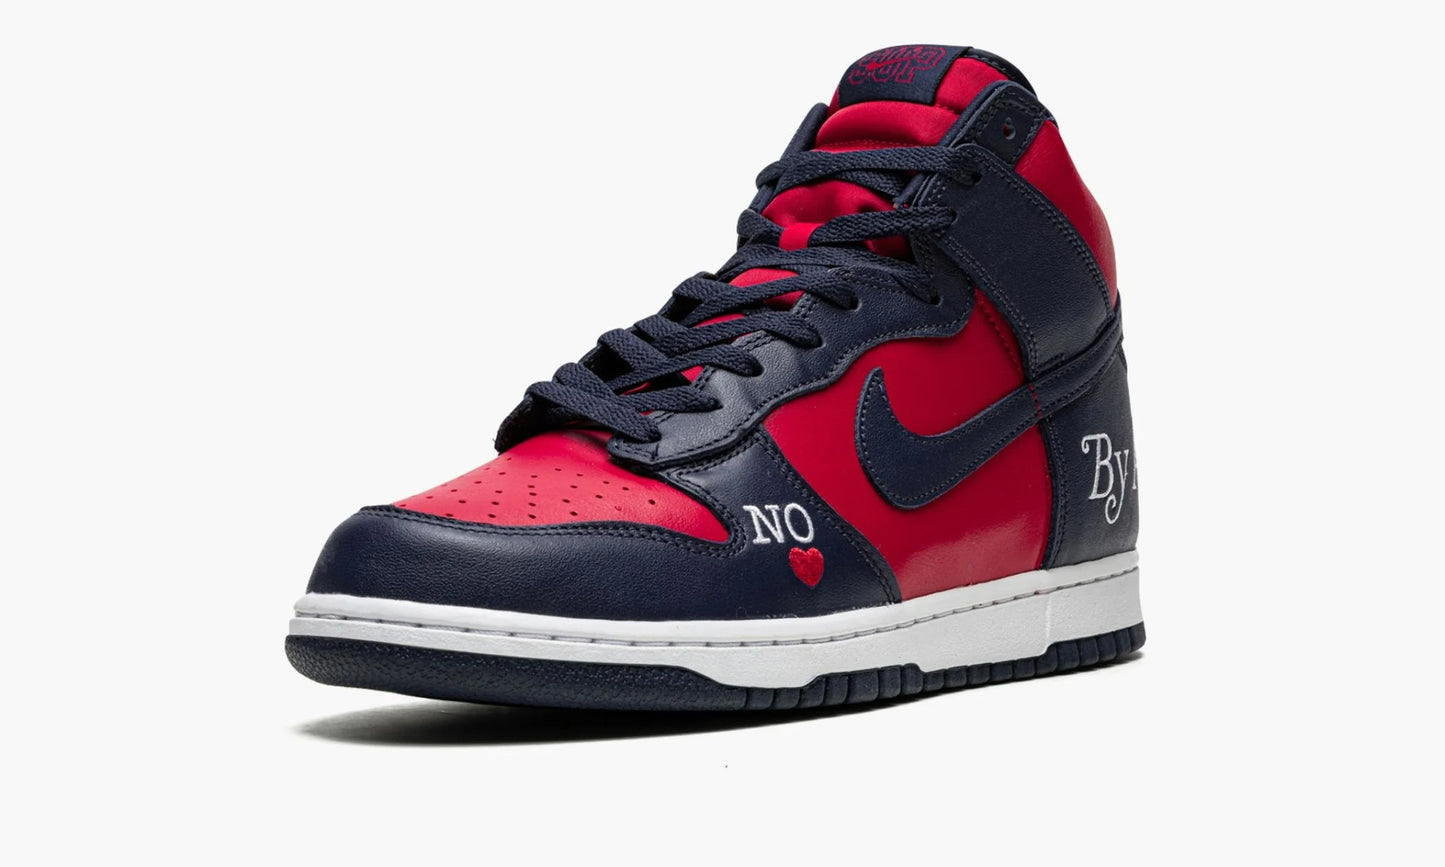 SB Dunk High Supreme By Any Means Navy - DN3741 600 